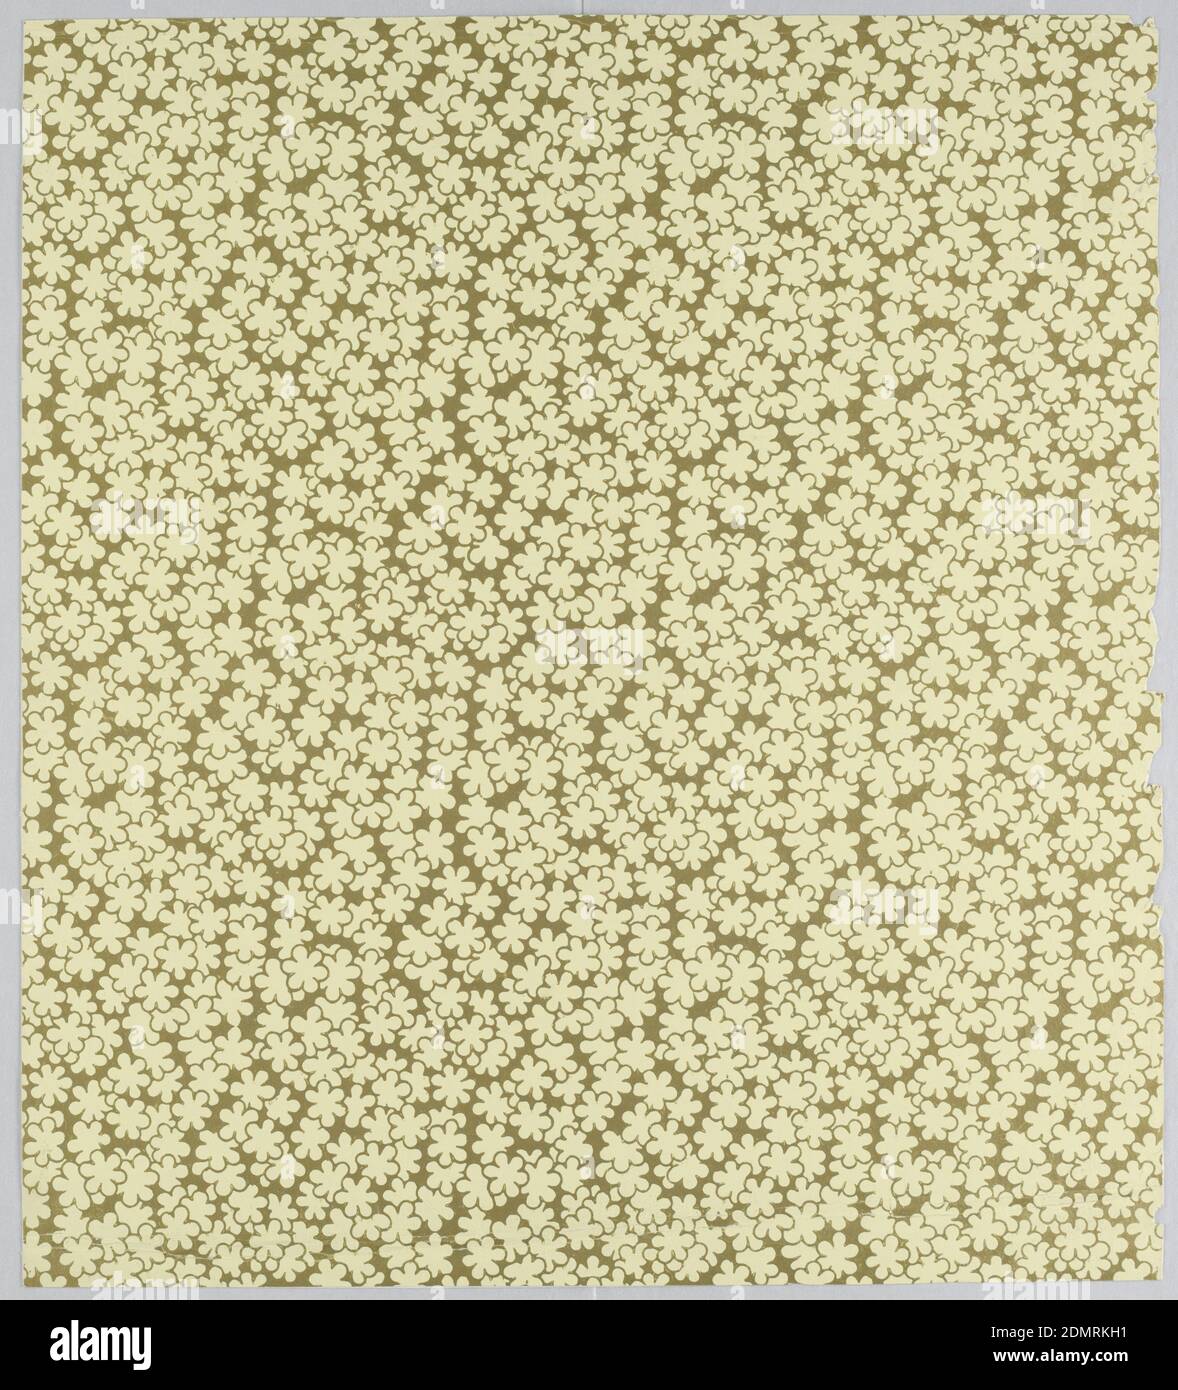 Sidewall, Machine-printed paper, Aesthetic pattern of stylized small six-petal flowers densely overlapping with only small gaps of negative space; flowers are undetailed; roughly hexagonal pattern repeat; color scheme of cream on brown ground., USA, ca. 1880, Wallcoverings, Sidewall Stock Photo